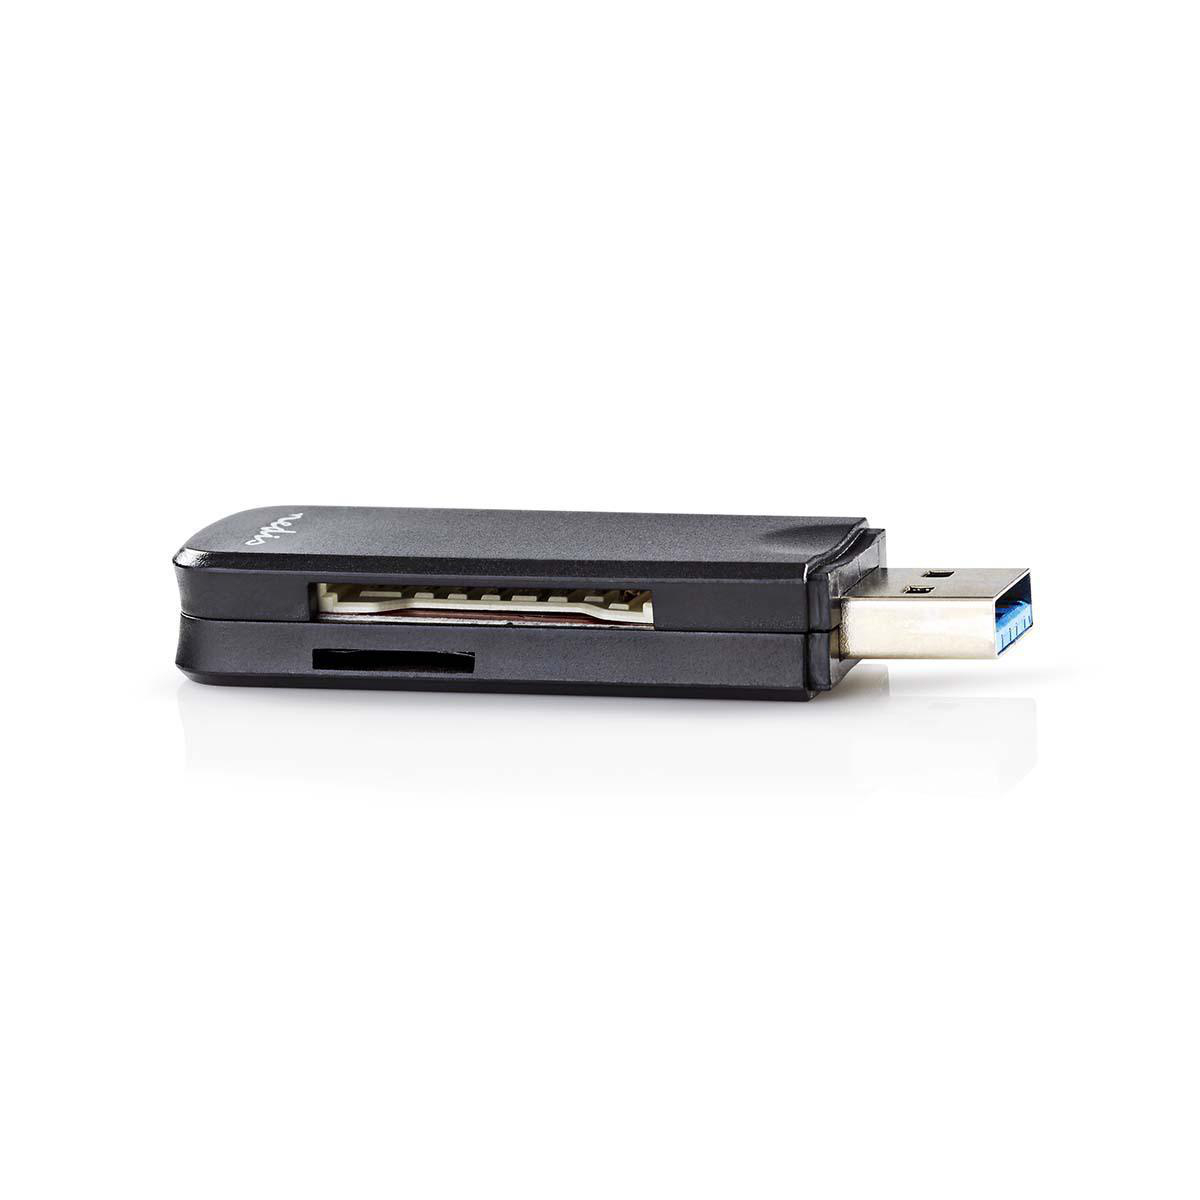 SanFlash PRO USB 3.0 Card Reader Works for Alcatel Tetra Adapter to Directly Read at 5Gbps Your MicroSDHC MicroSDXC Cards